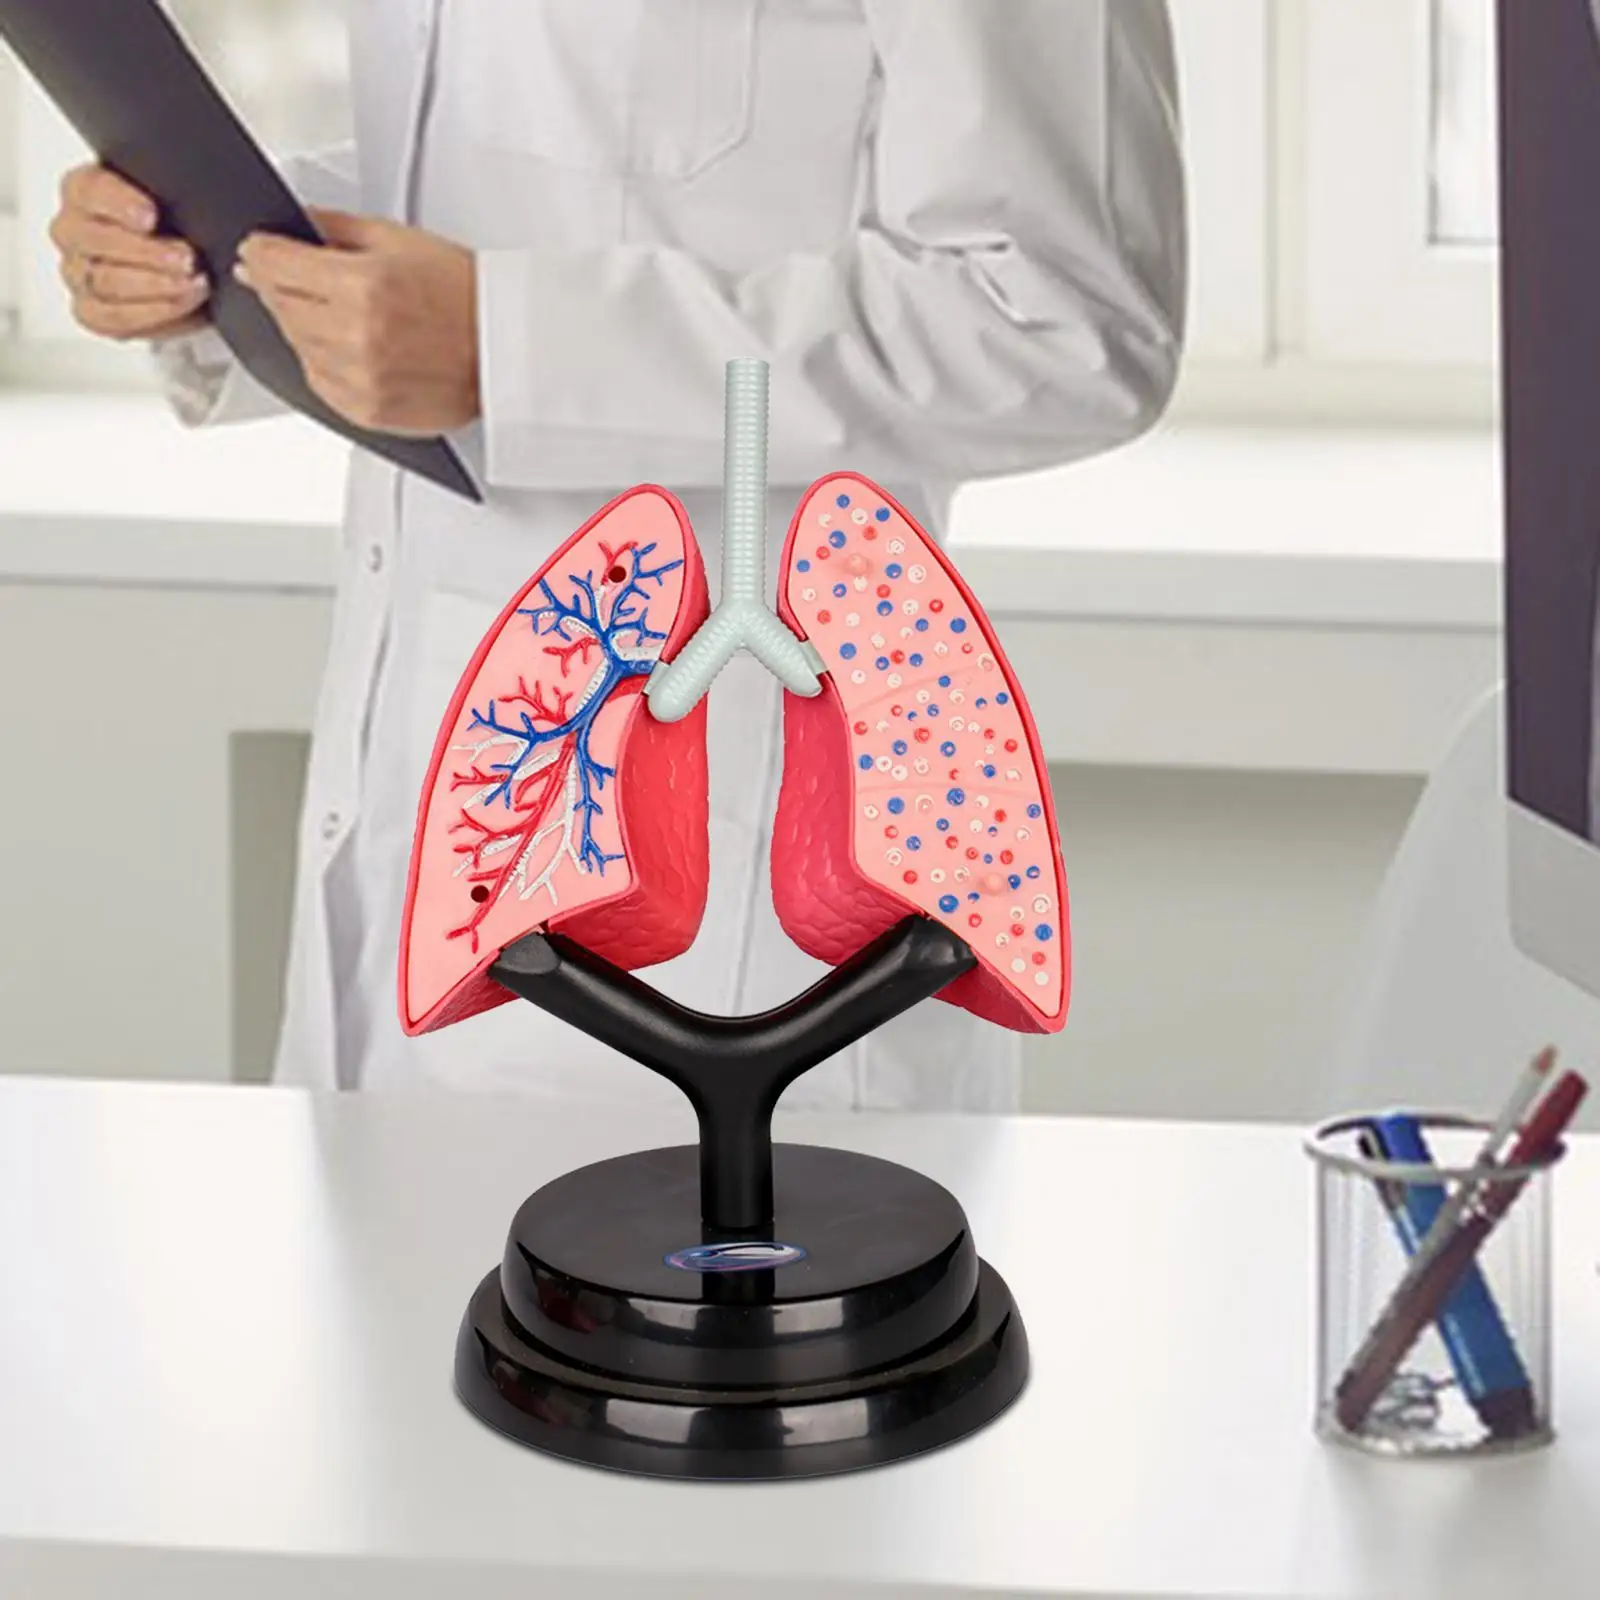 Respiratory System Model Human Lung Model for Kids for Home Science Learning